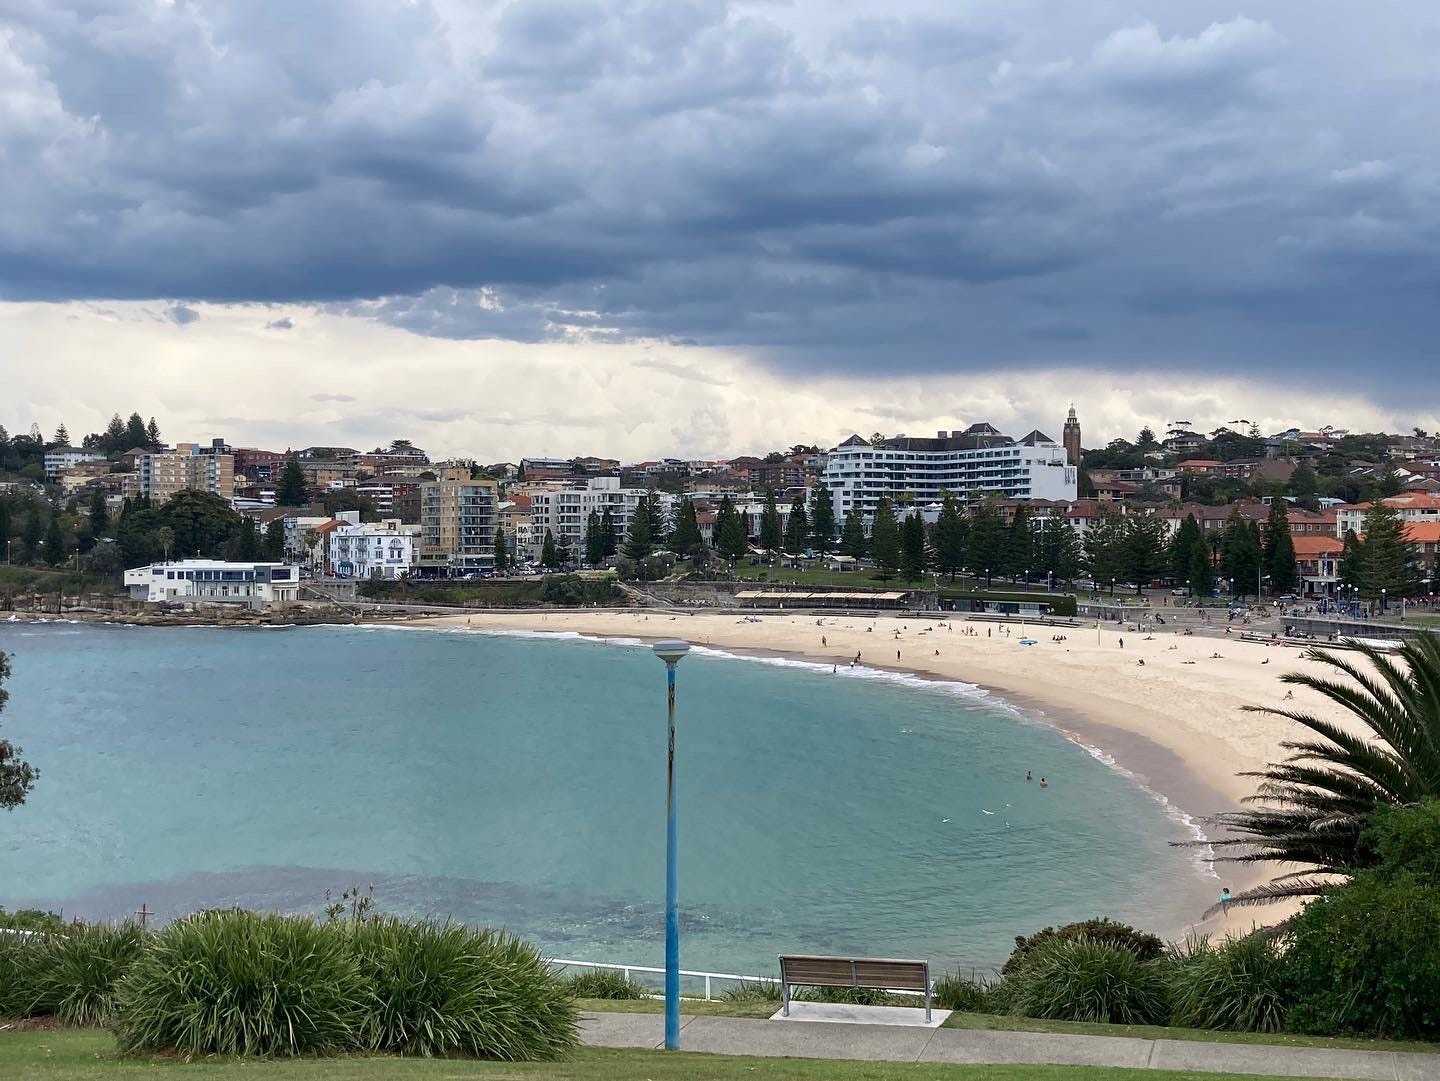 Coogee beach, with the storm clouds in the distance